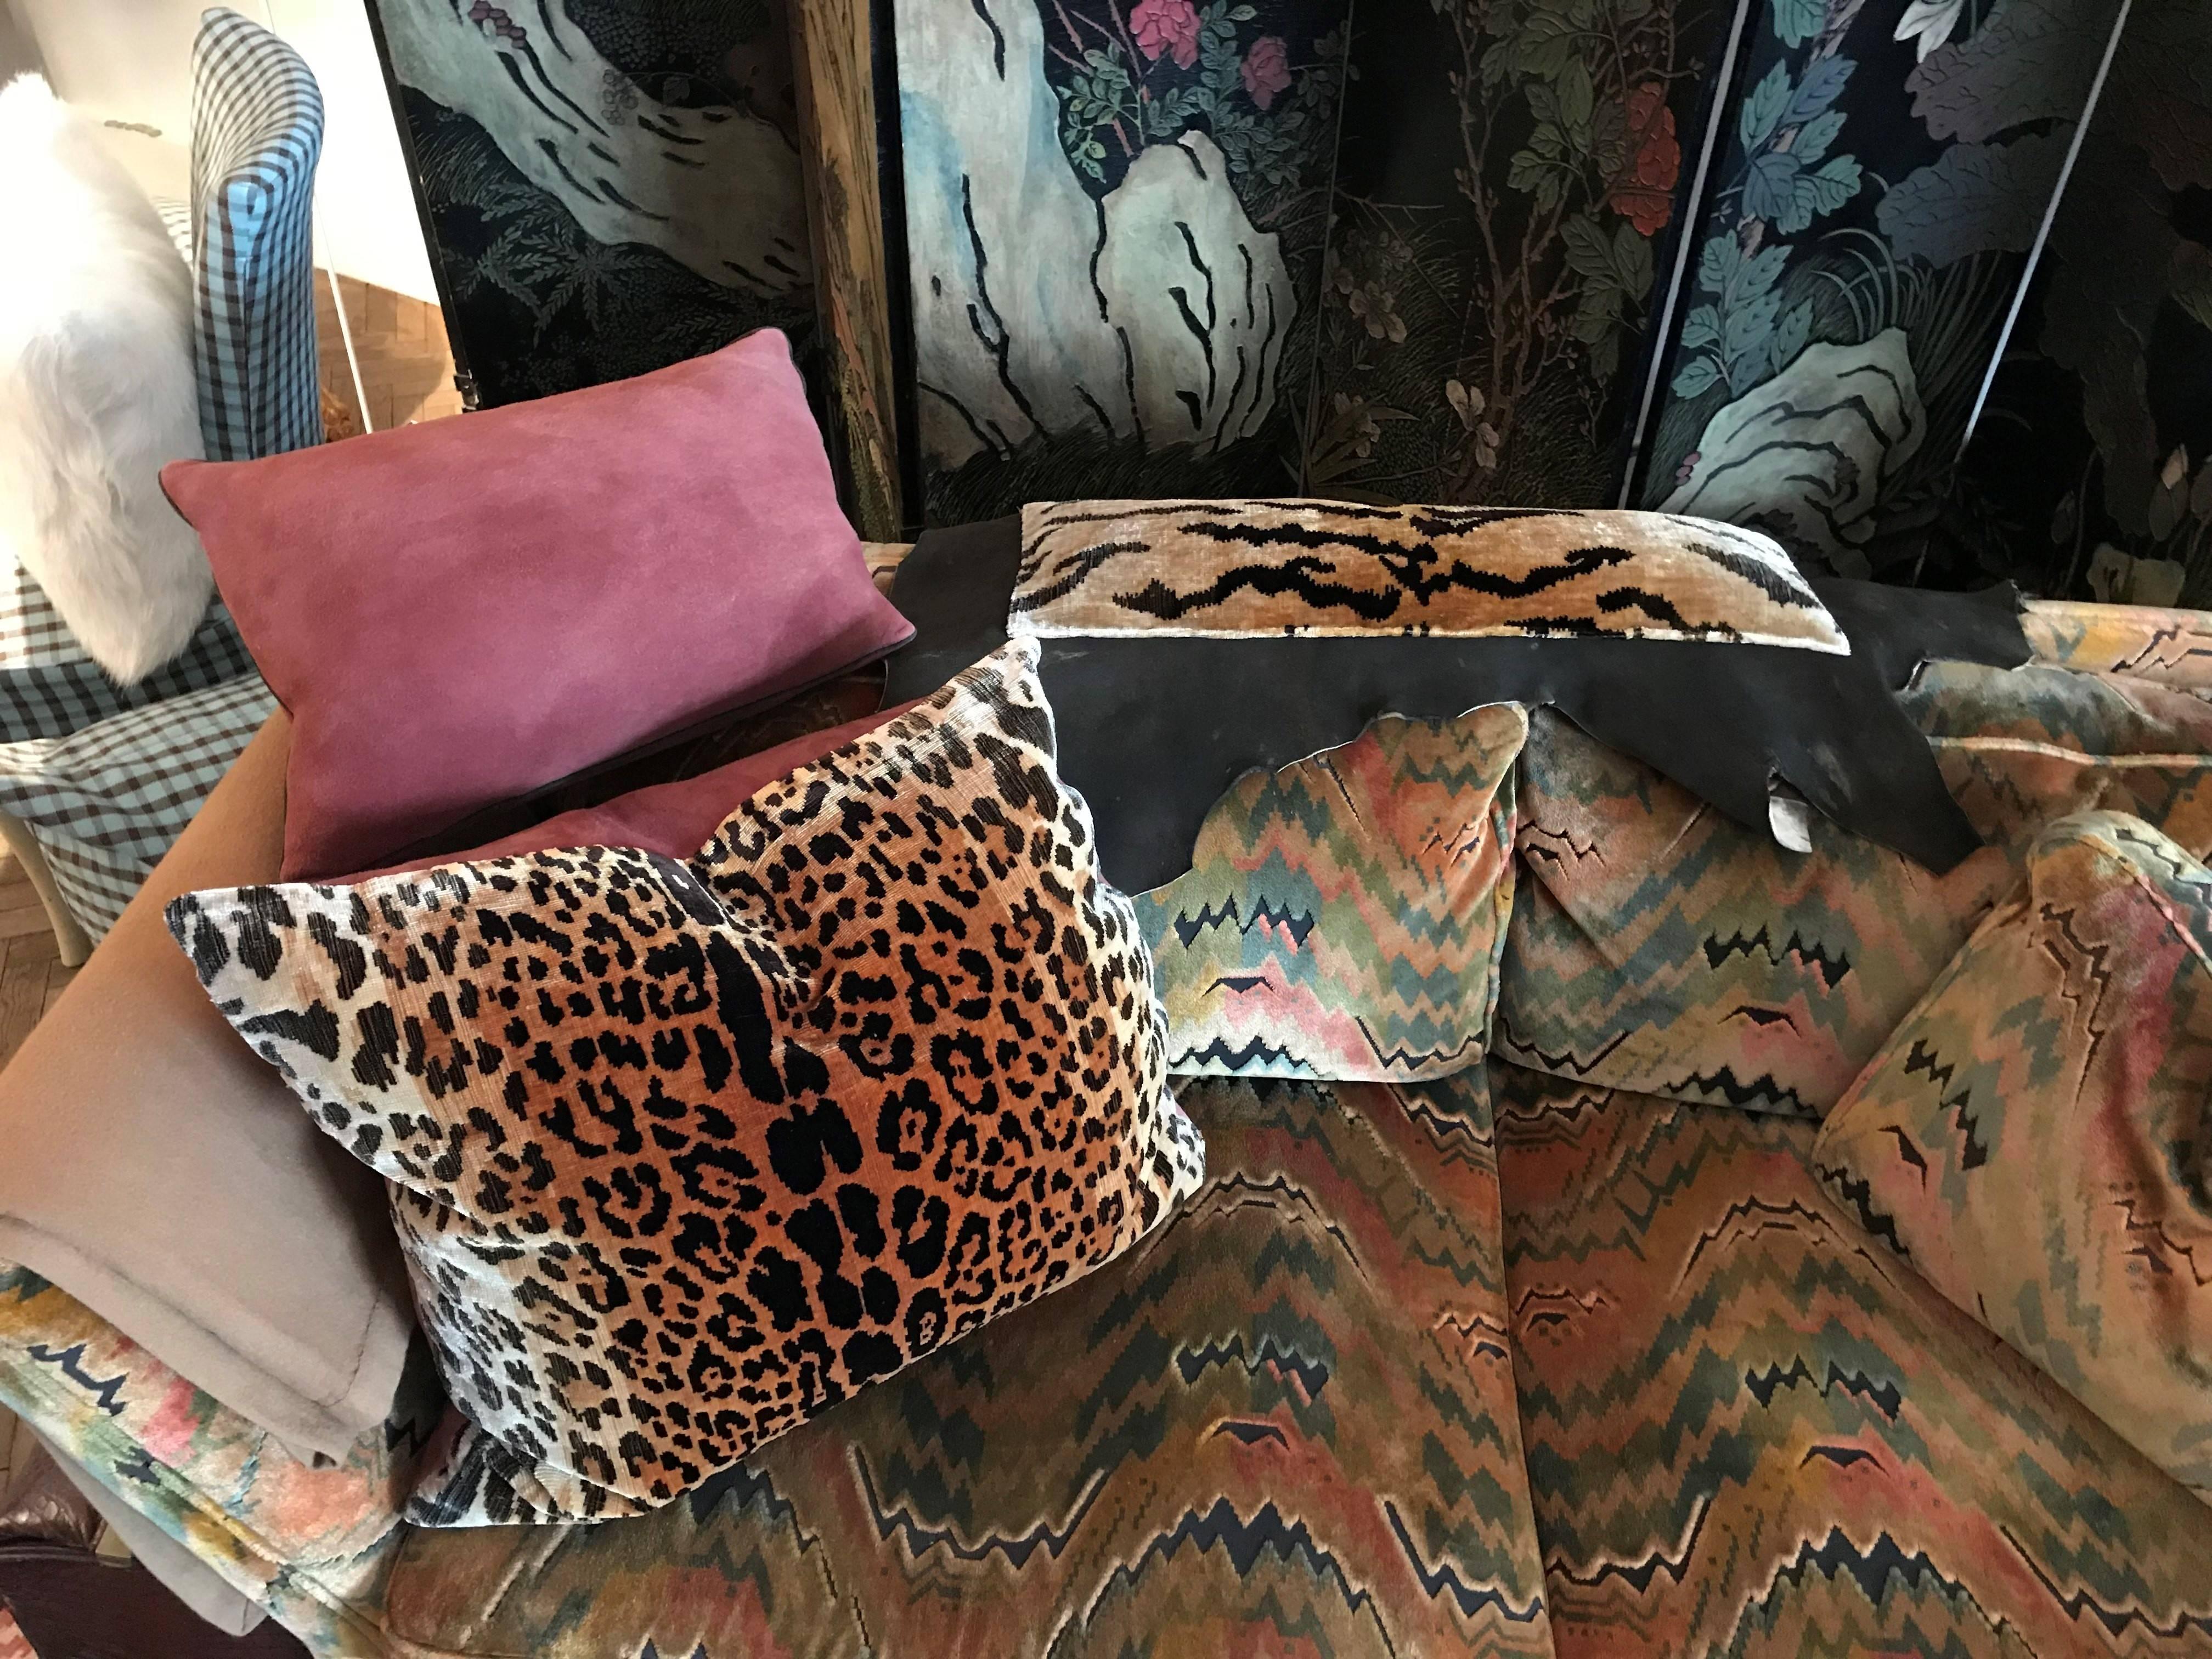 Le Manach silk velvet and suede upholstered pillow. One of a kind. 

The Maison Le Manach was founded in 1829 and is celebrating two centuries of textile creation. Le Manach is one of the last French Maisons that can reproduce thanks to its